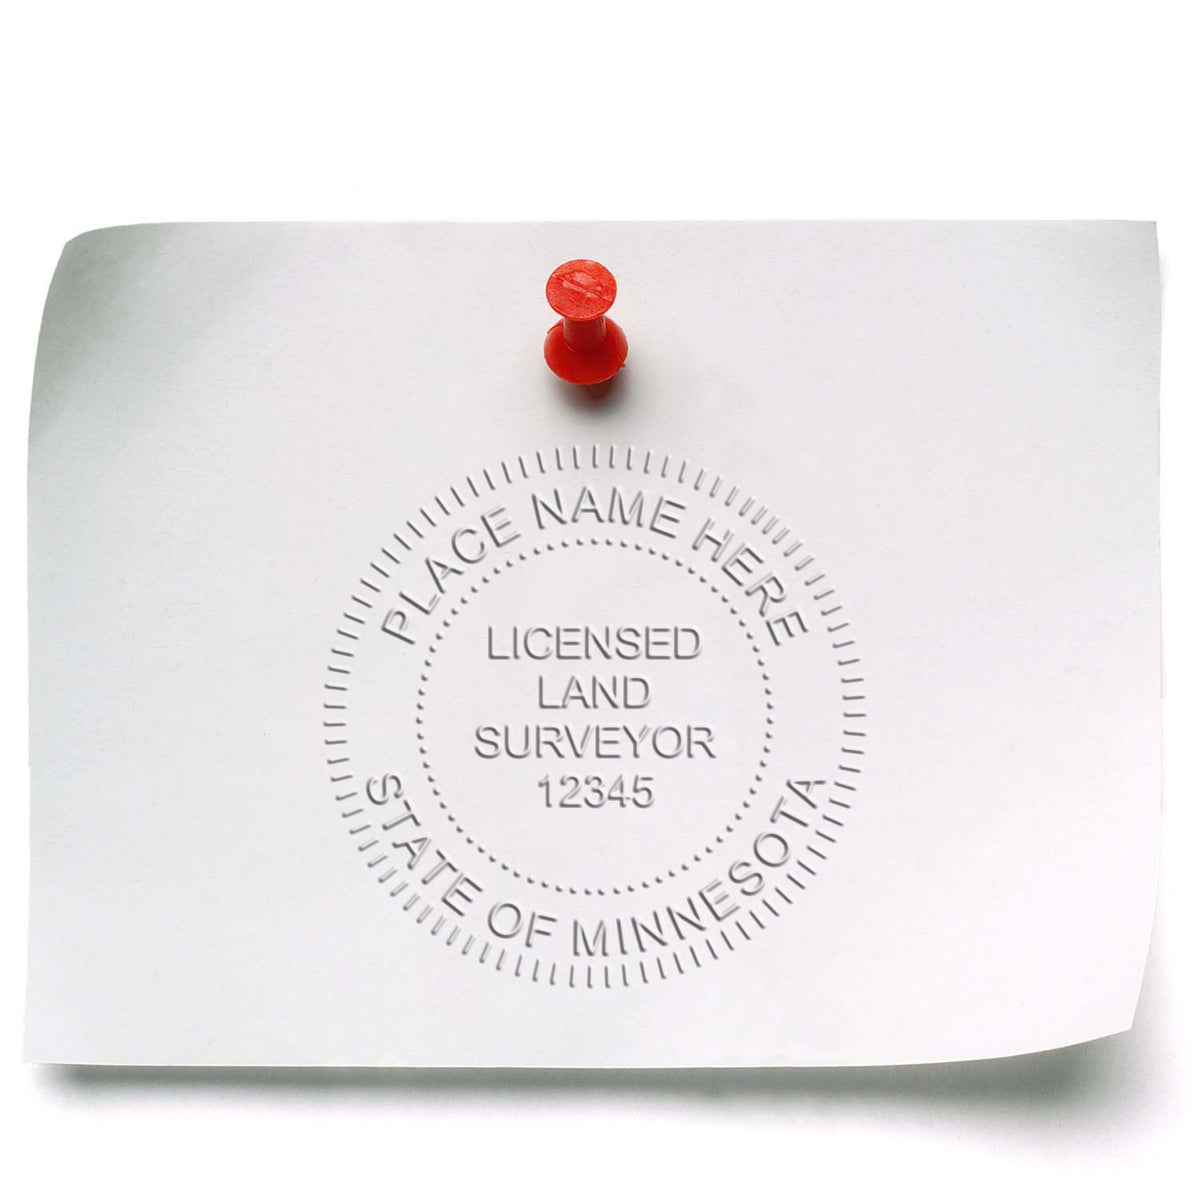 An in use photo of the Gift Minnesota Land Surveyor Seal showing a sample imprint on a cardstock